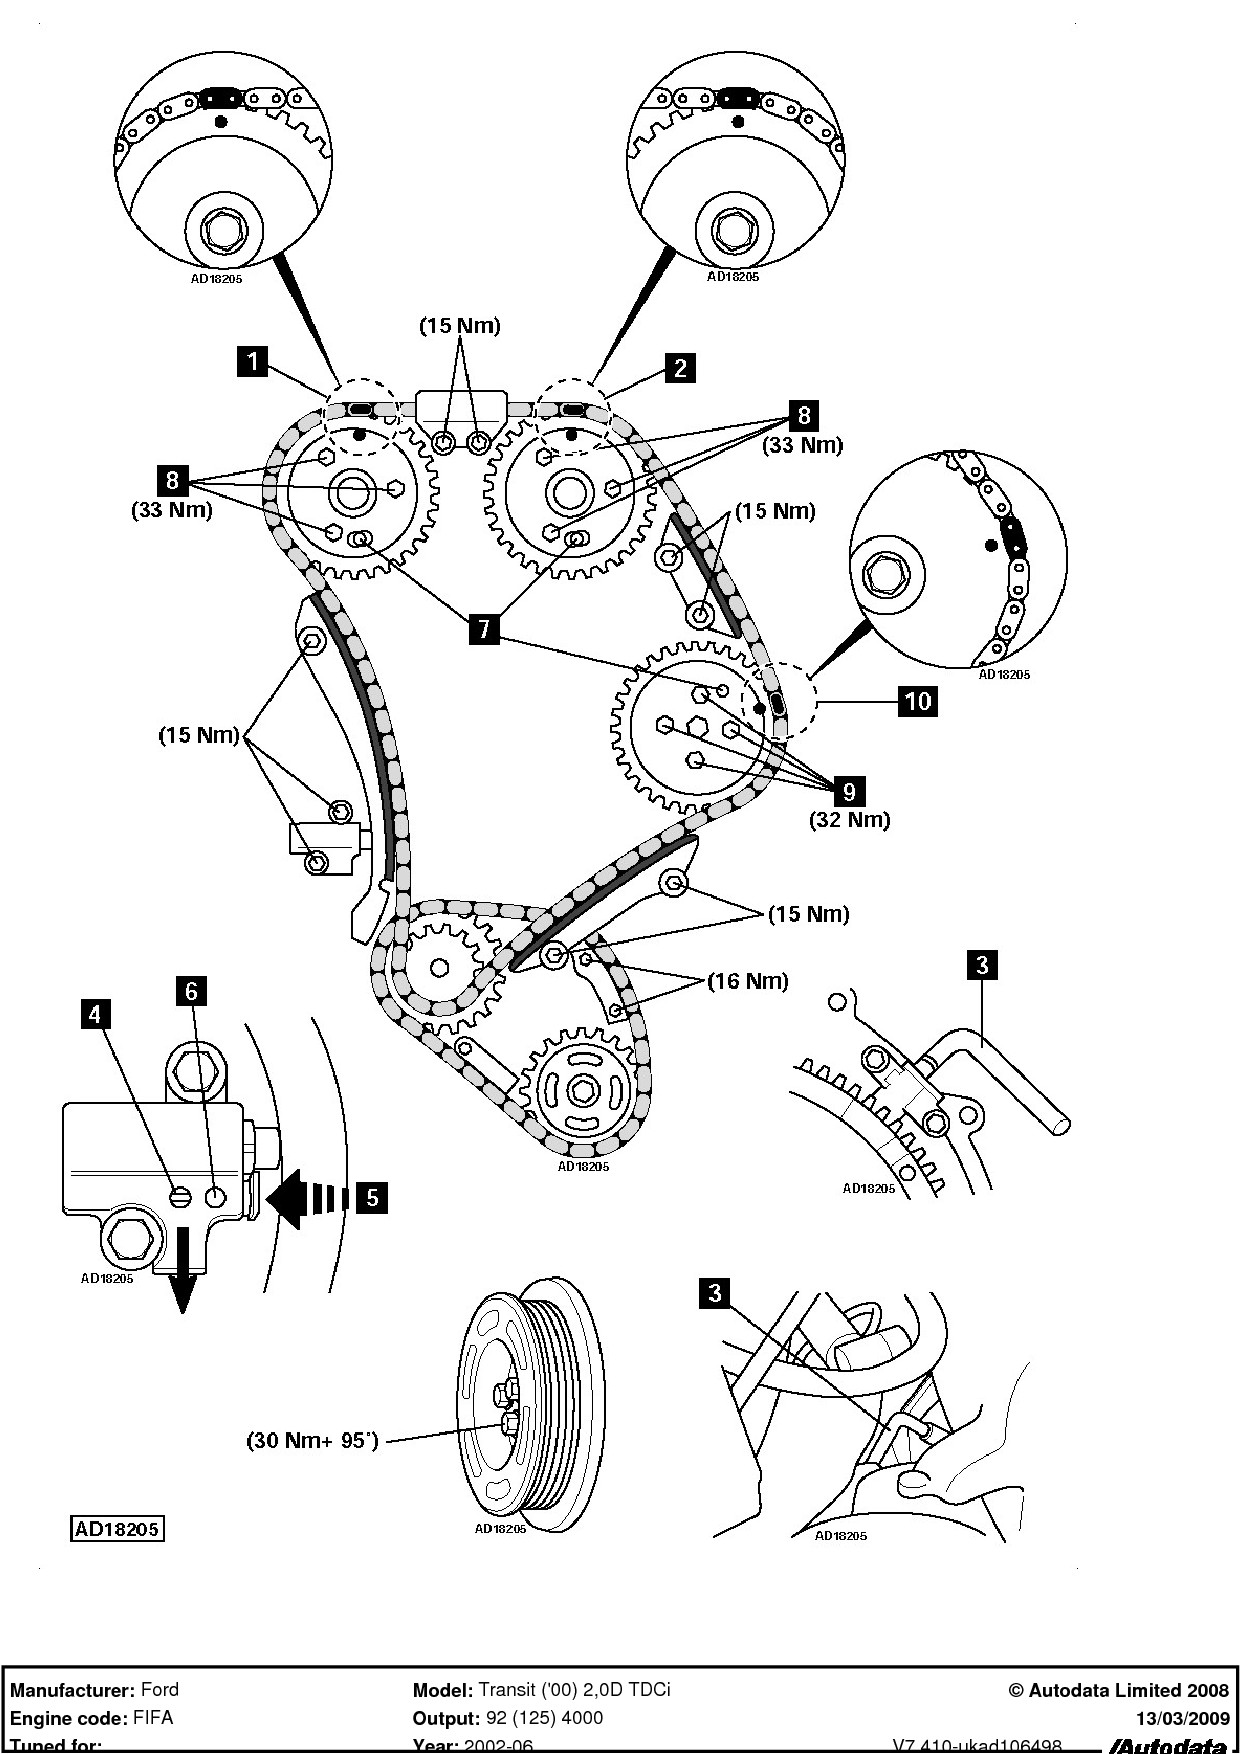 Transit Engine Diagram ford Transit Van 2002 How Do You Set the Timing Marks to Fit New Of Transit Engine Diagram